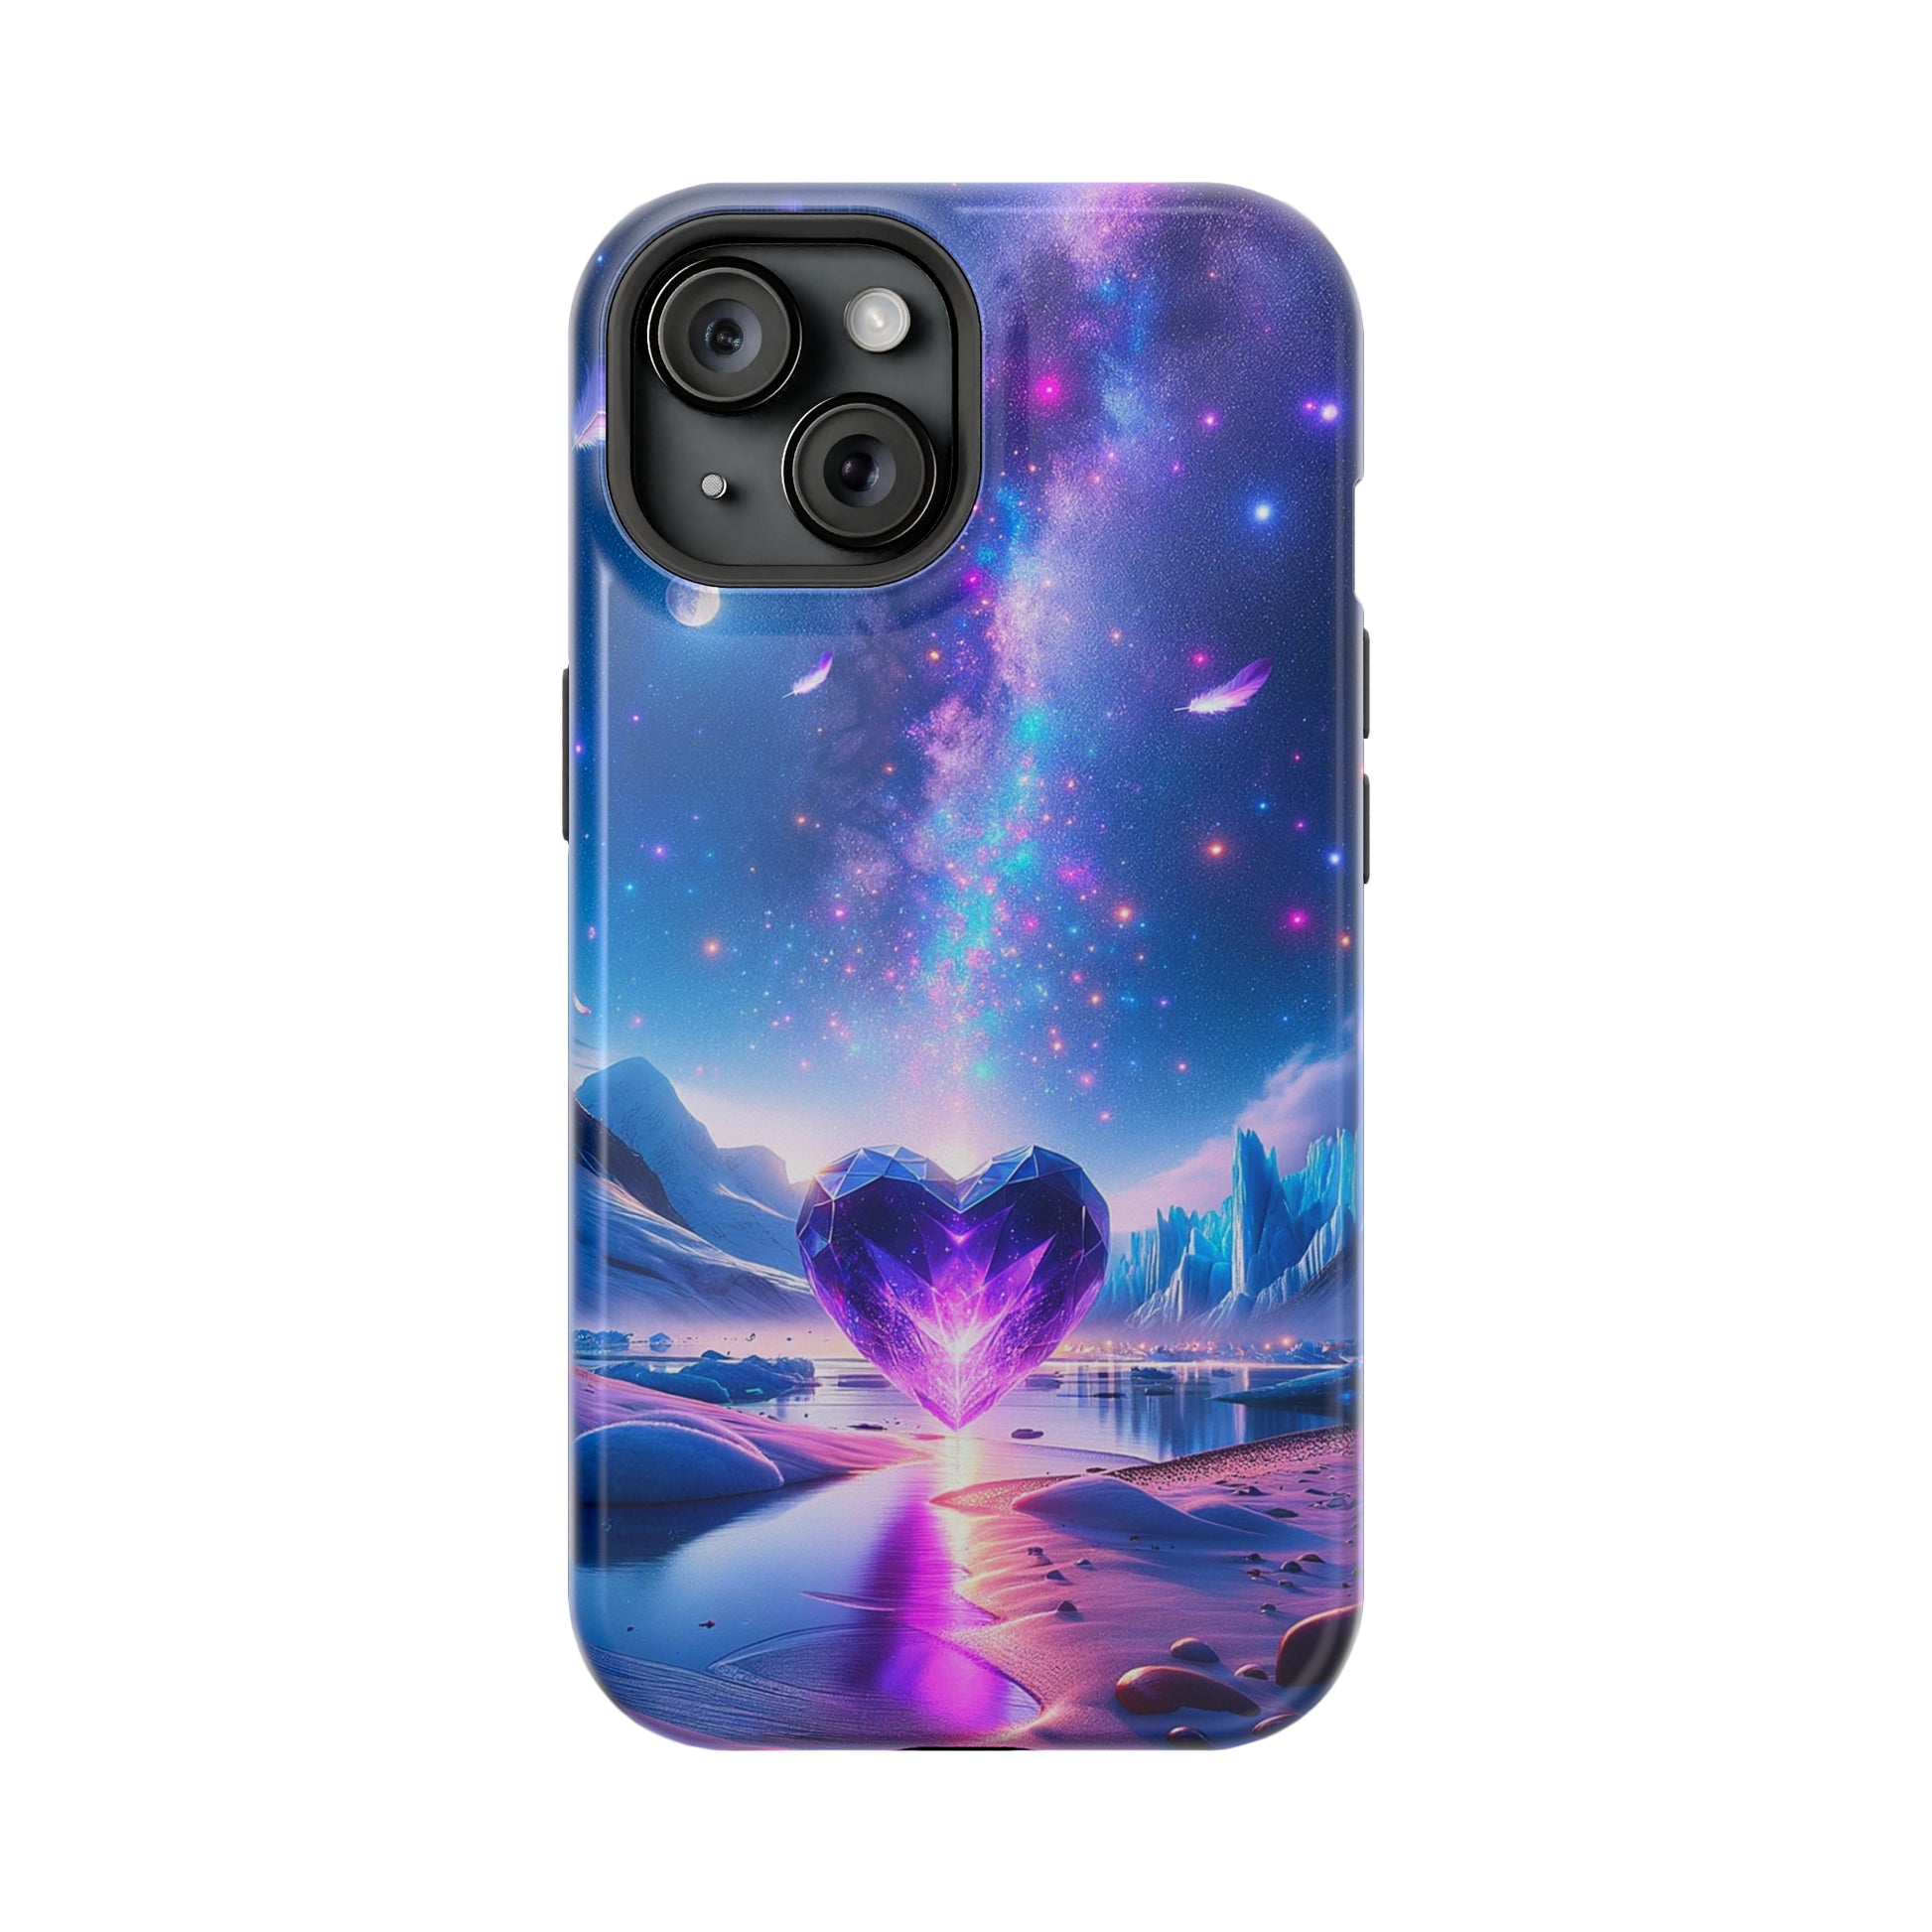 Galactic Heartbeat (iPhone MagSafe Case)Galactic Heartbeat MagSafe Durable Case: Style Meets Protection 📱✨
Upgrade your device with Rima Gallery's Galactic Heartbeat MagSafe Durable Case. This case isn’t RimaGallery